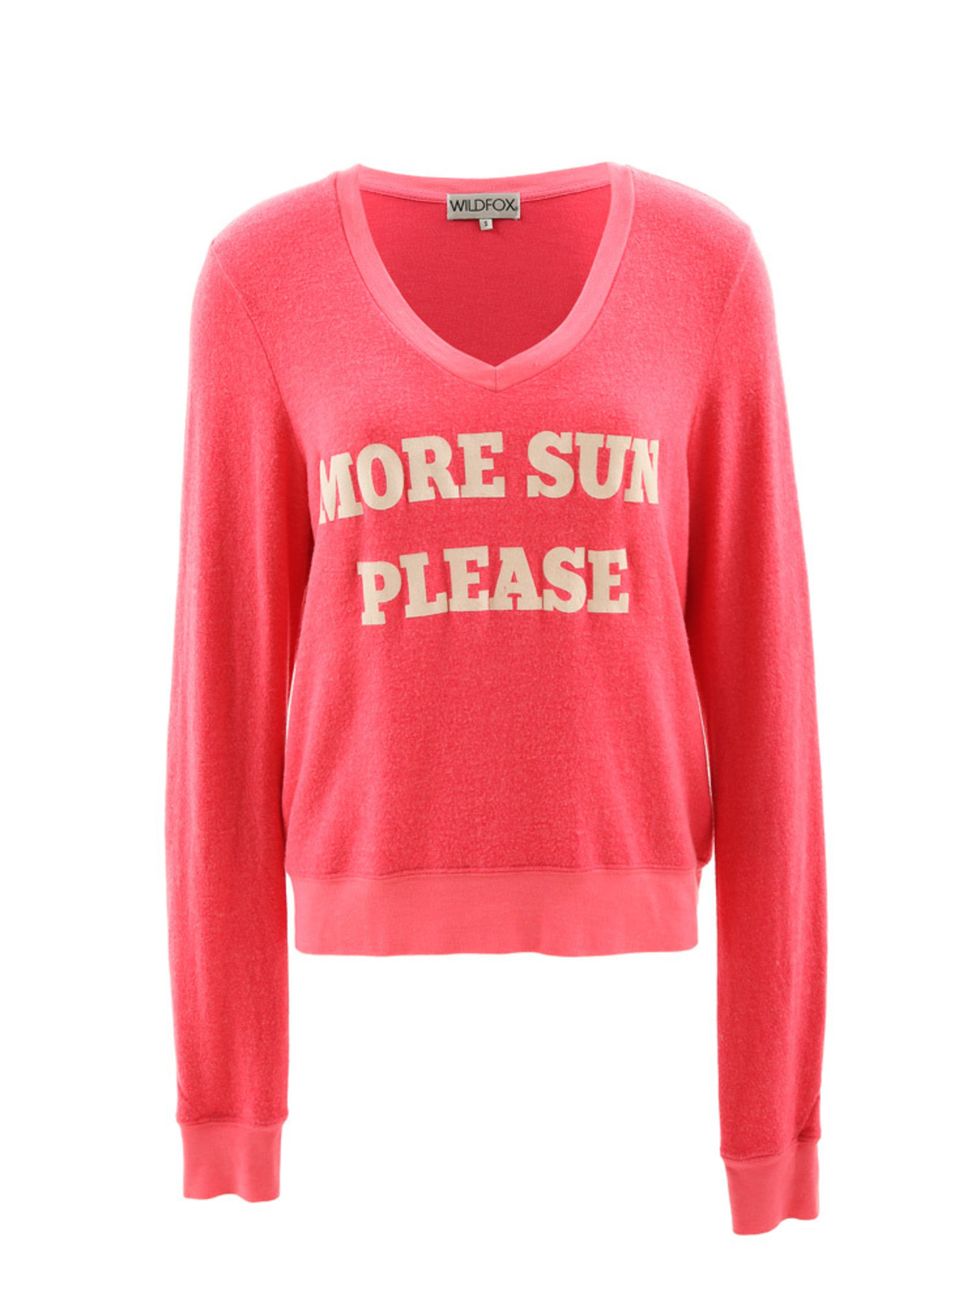 <p><a href="http://www.wildfoxcouture.co.uk/store/shop-now/wildfox-sweaters/more-sun-please-v-neck-baggy-beach-jumper.html" target="_blank">Wildfox</a> jumper, £83</p>